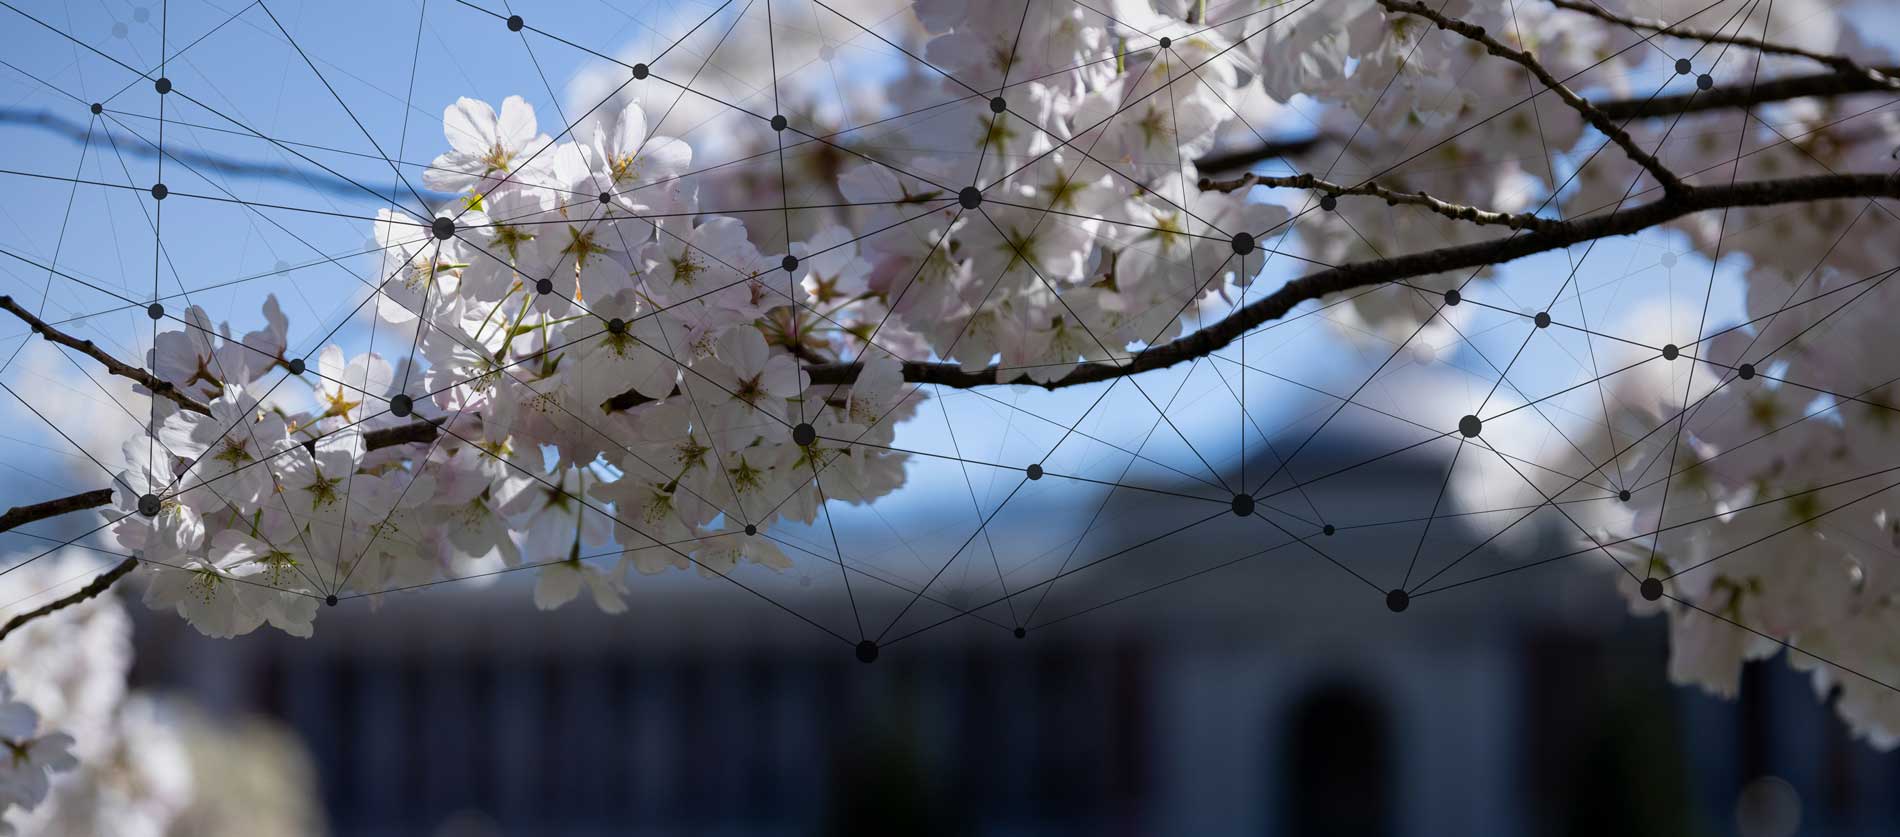 cherry blossoms with an overlay of connected dots with lines, creating a network effect